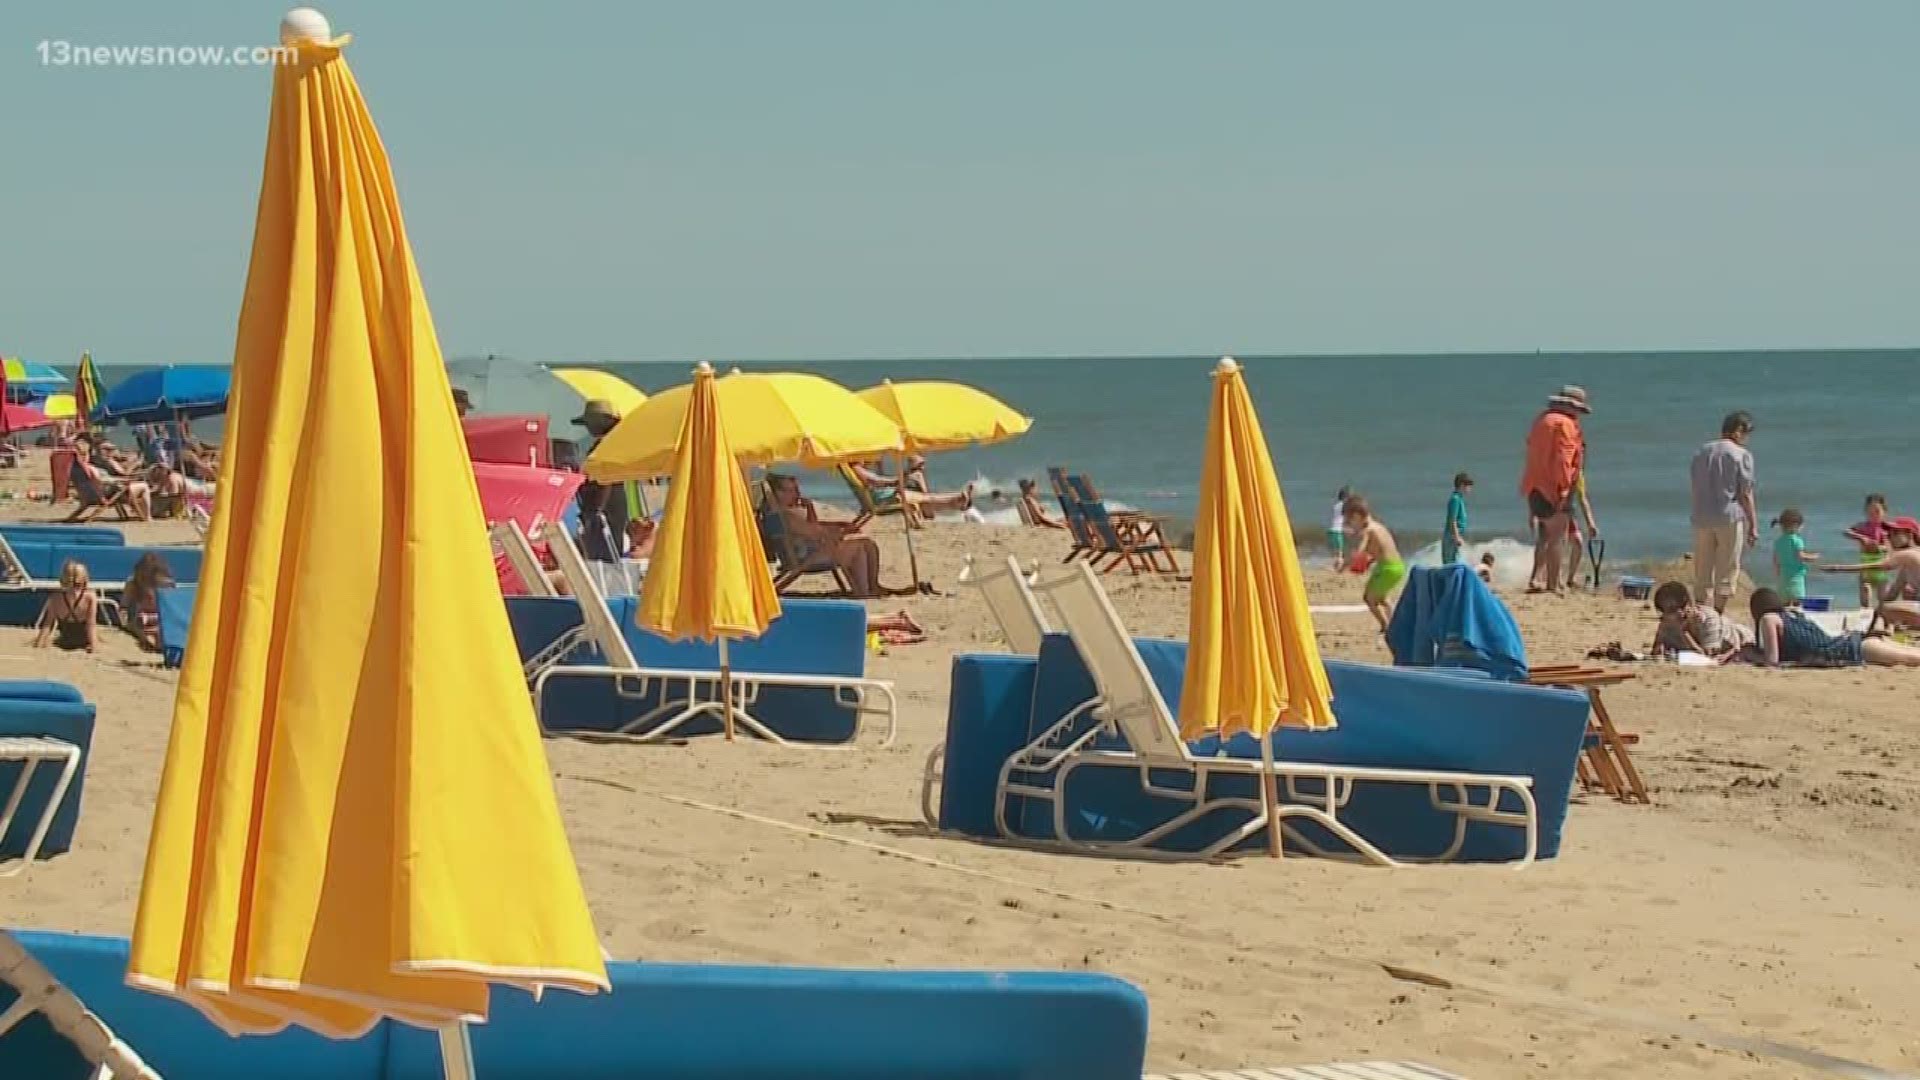 Sens. Tim Kaine and Mark Warner are supporting an effort to protect people from flying beach umbrellas. They want to see a public safety campaign to educate people about the dangers.